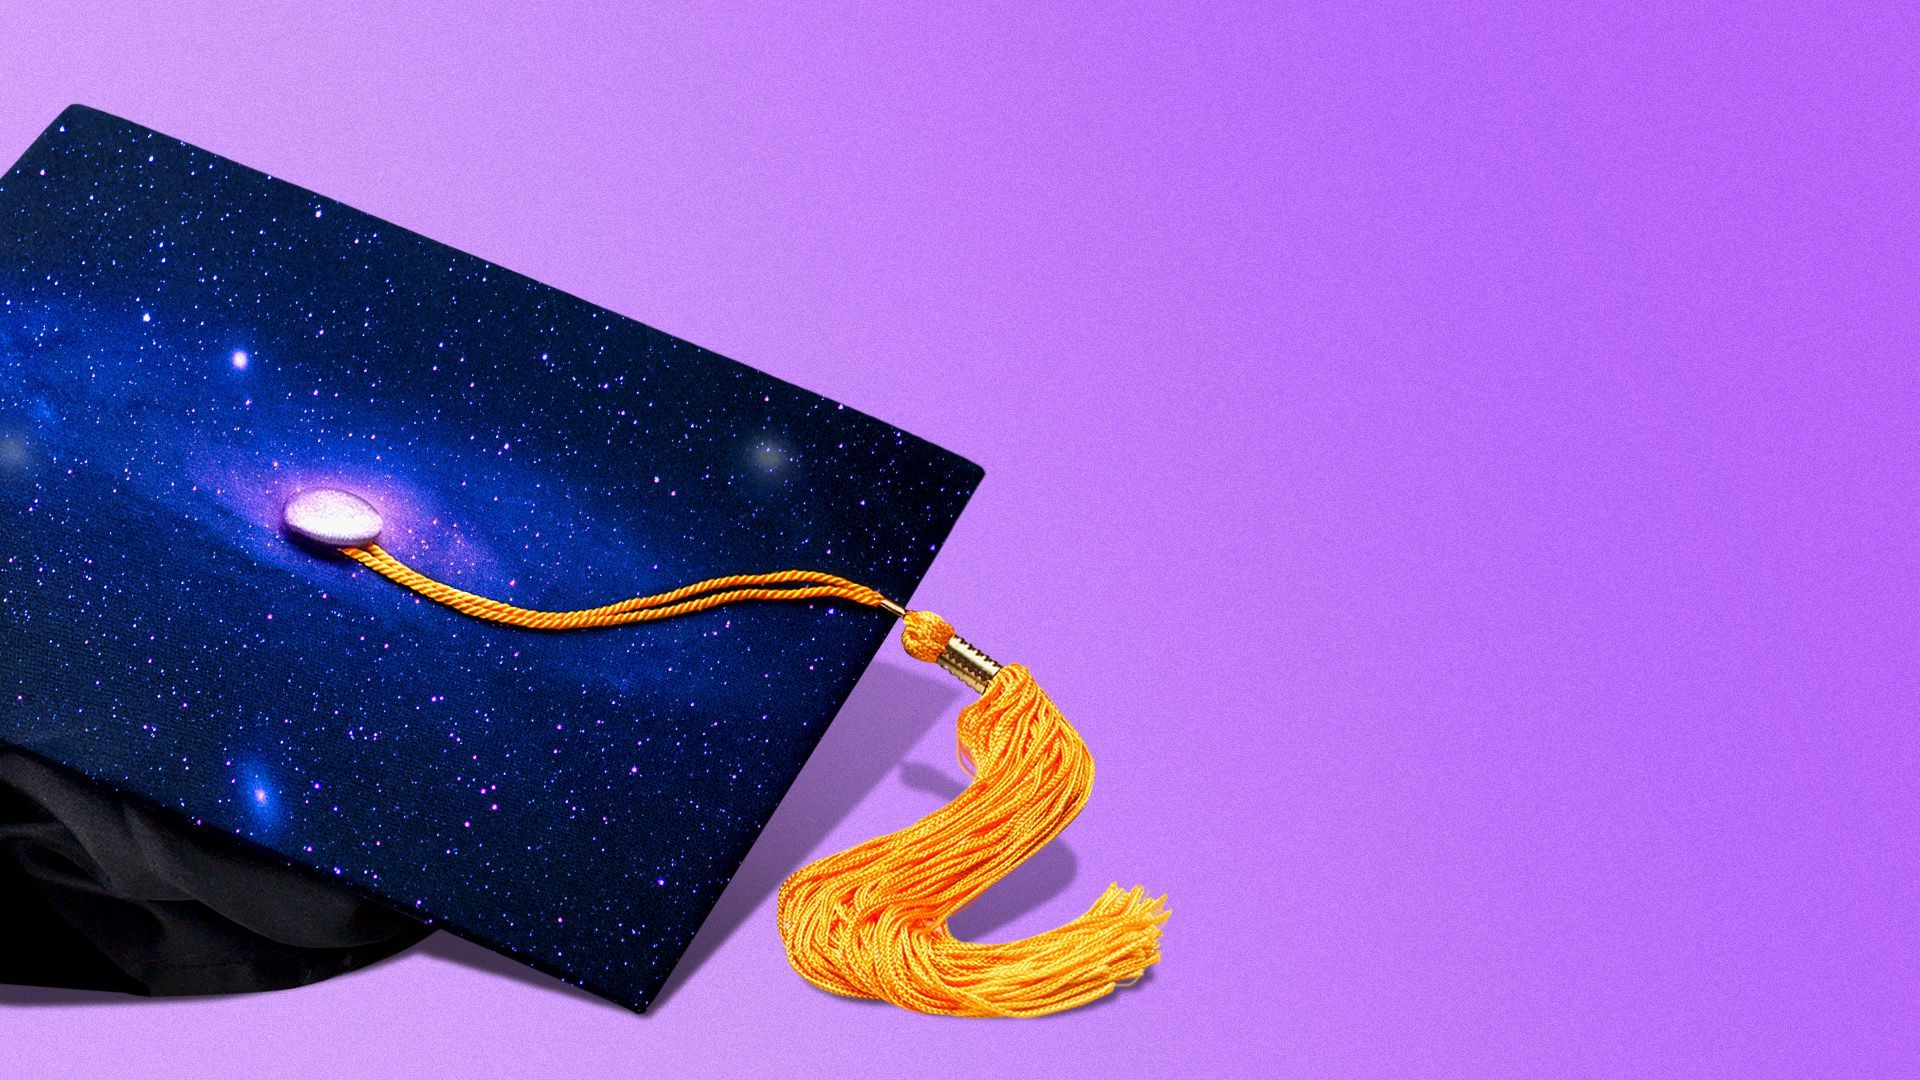 Illustration of a mortar board with a galaxy pattern on top